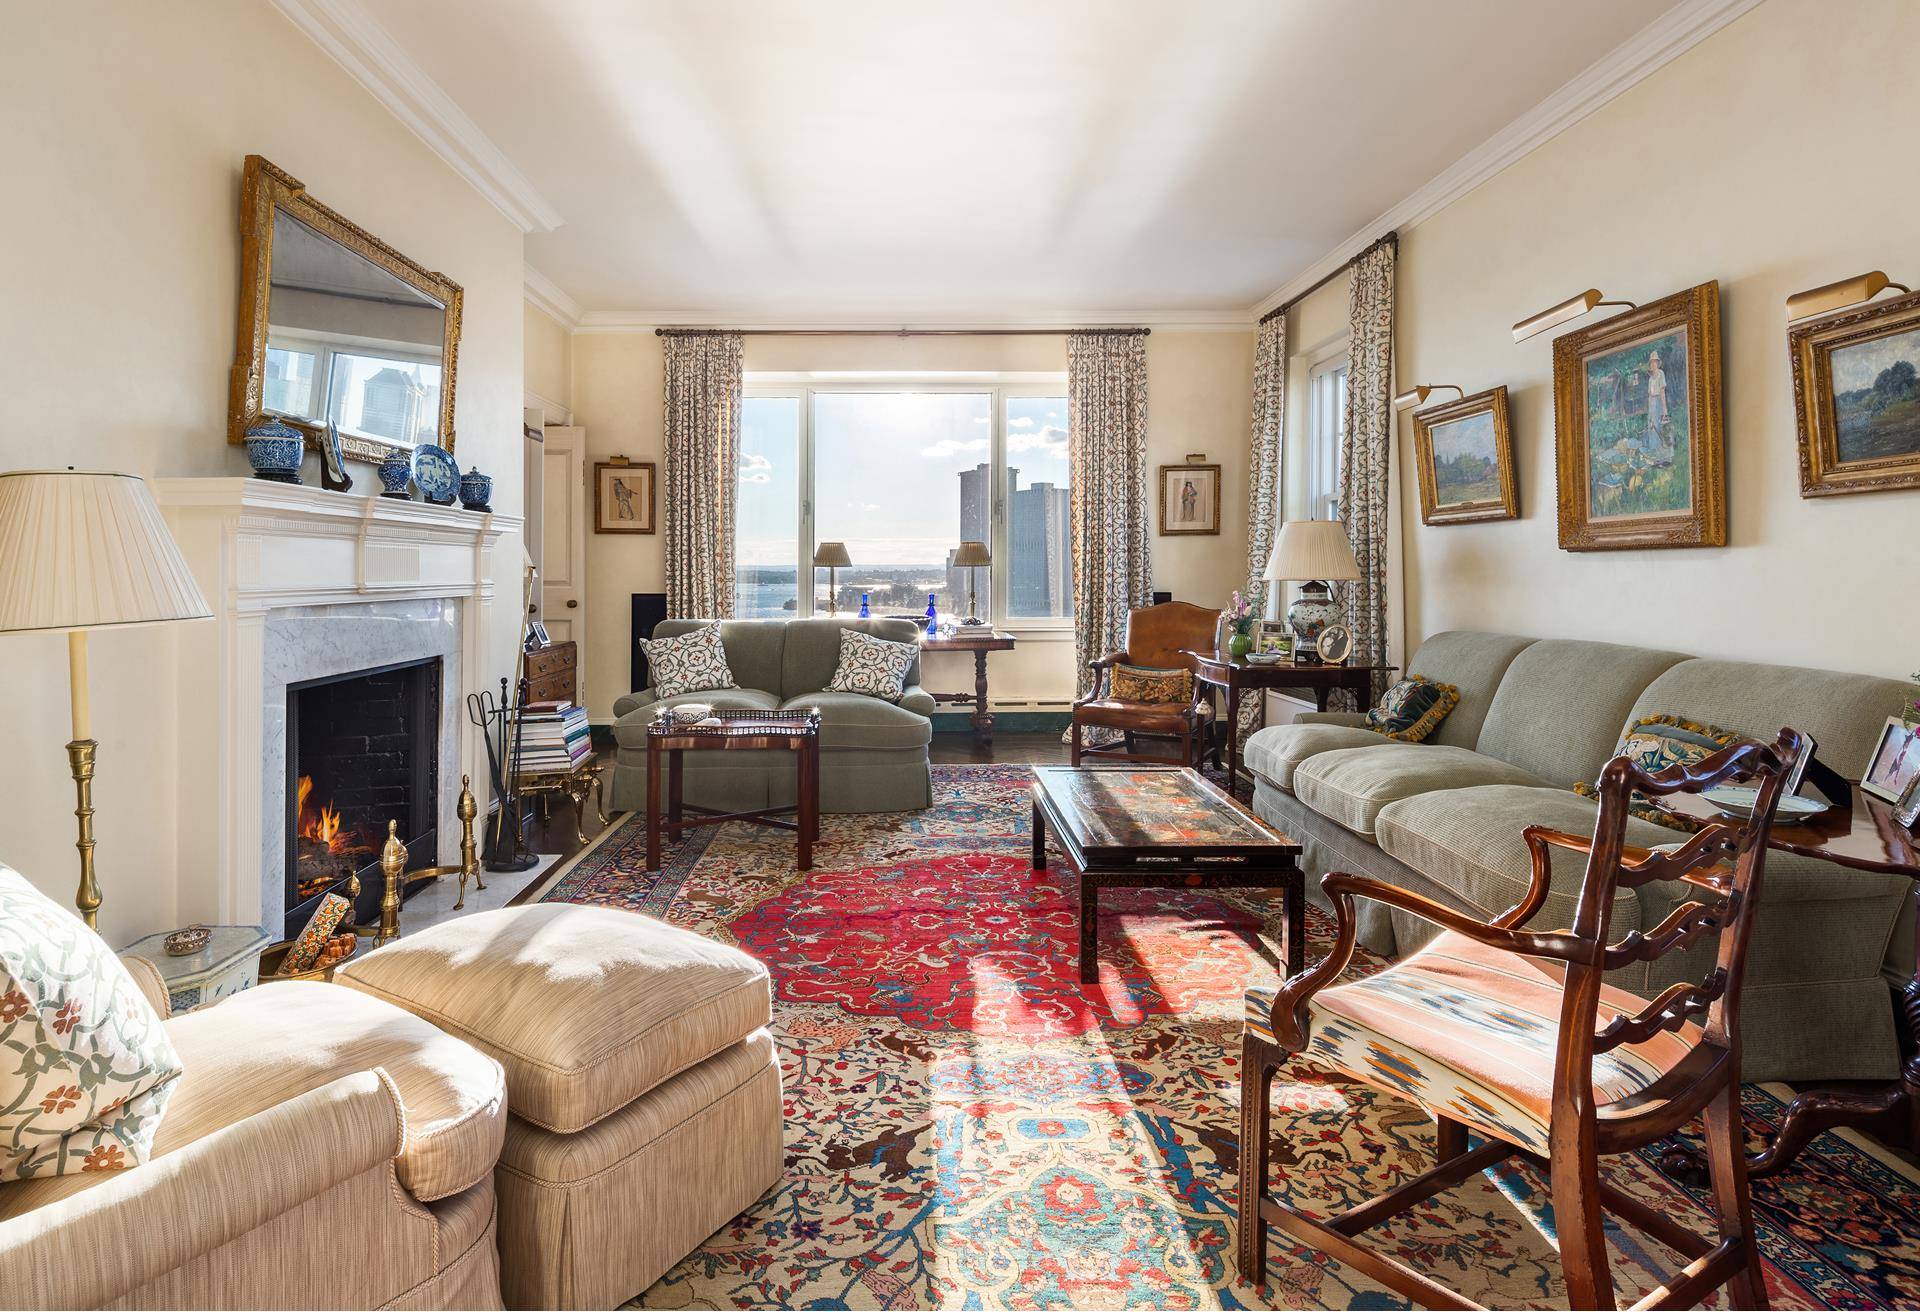 The Most Prime Penthouse in Brooklyn Heights With 93 feet of direct East River and New York Harbor frontage, Penthouse B at One Pierrepont Street offers a spectacular 360 degree ...